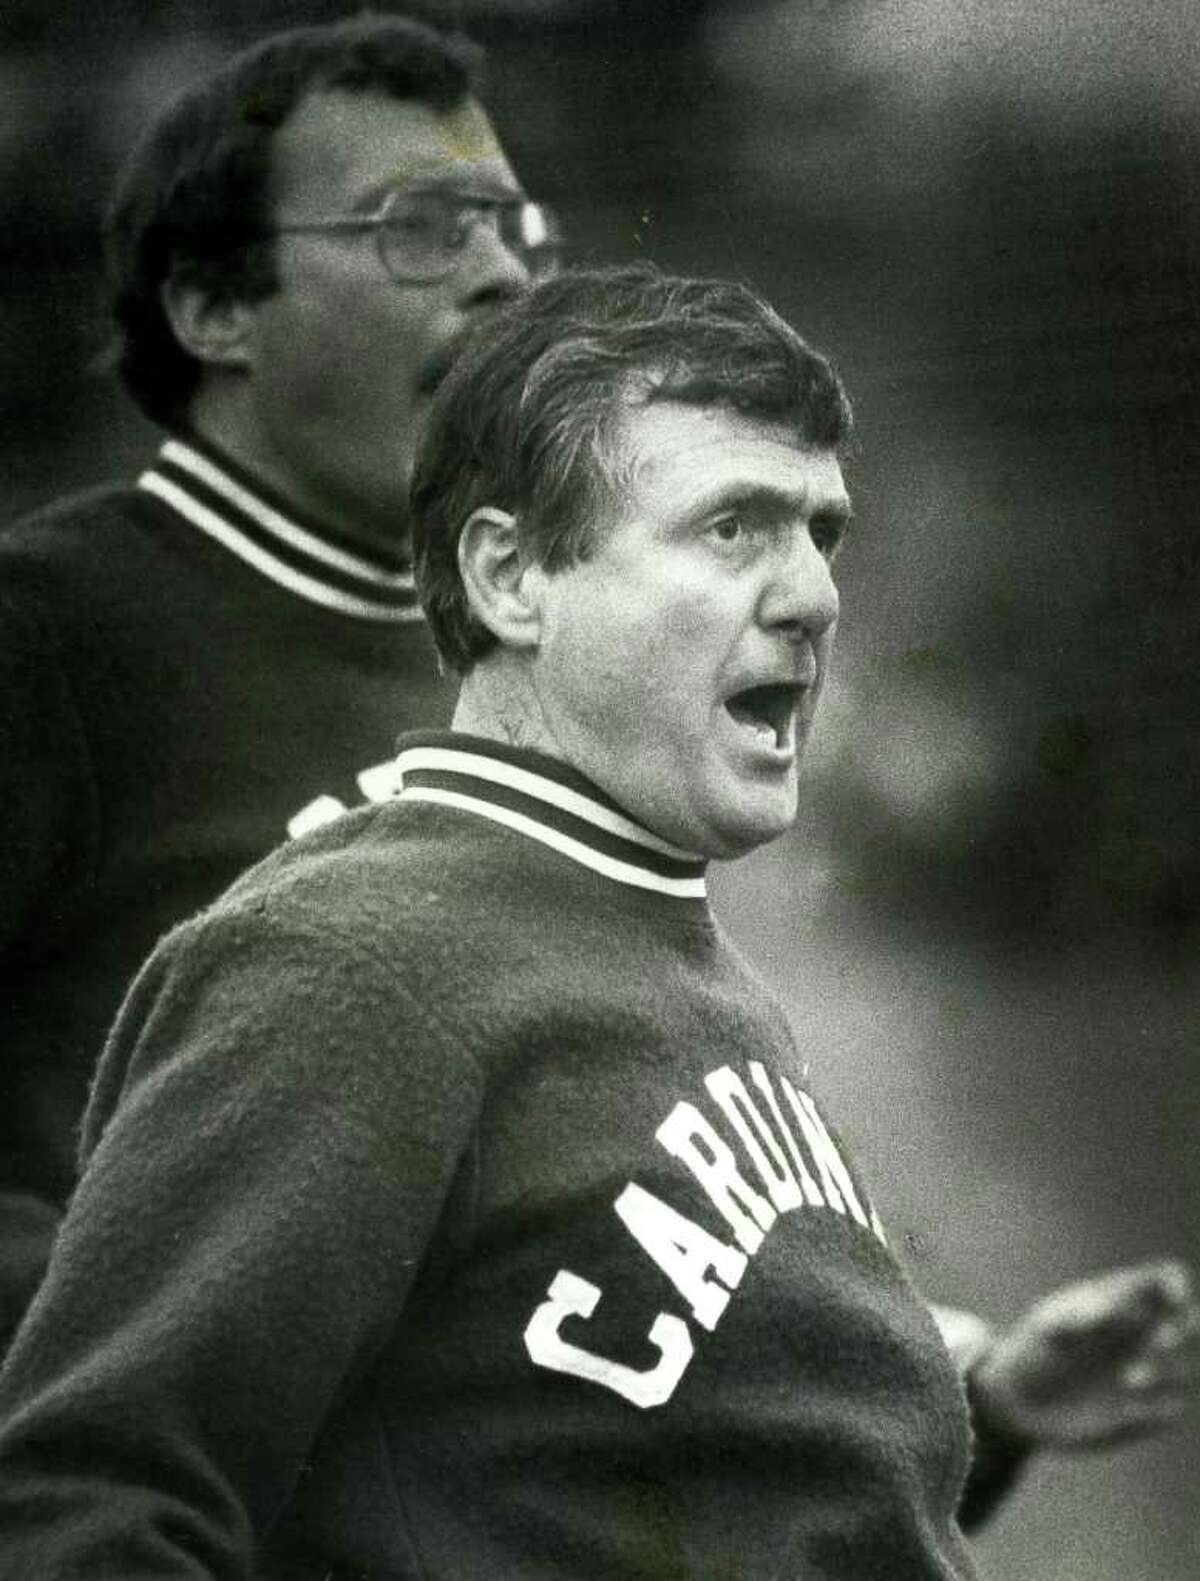 Greenwich coach Mike Ornato on the sidelines during Greenwich's 21-13 win over Ridgefield in the 1983 FCIAC championship game at Boyle Stadium.